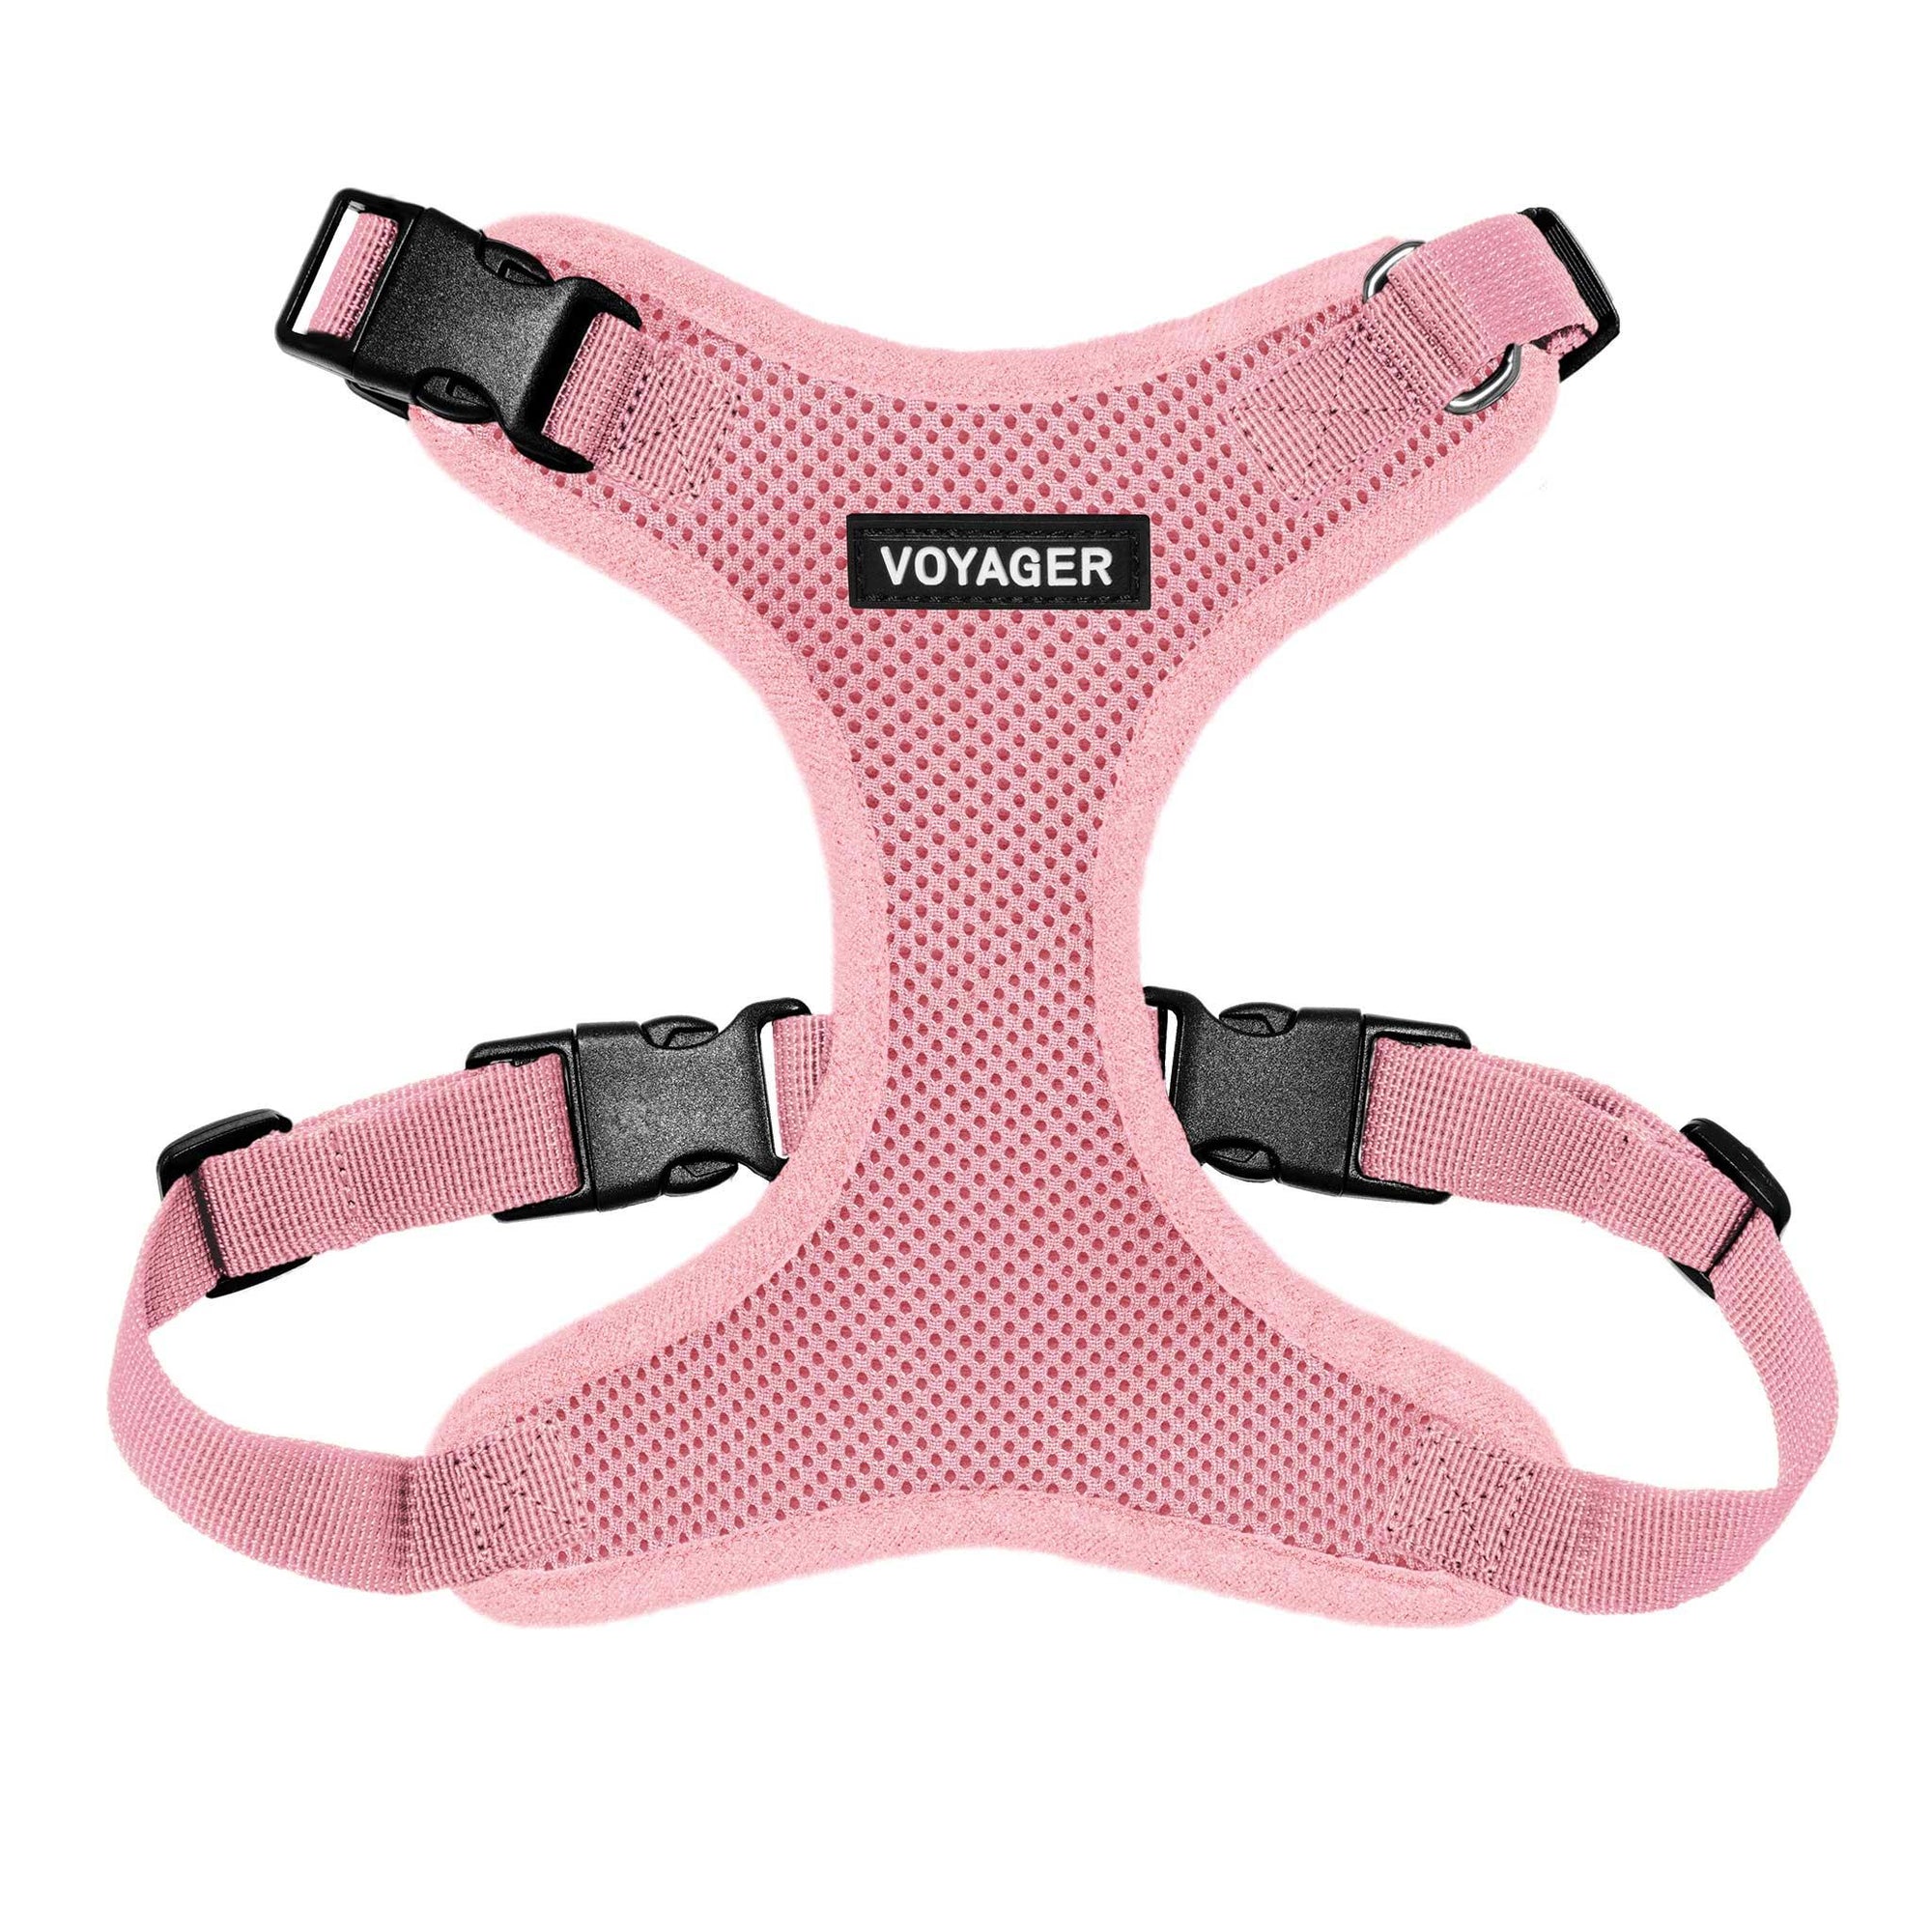 Step-In Lock Dog Harness - VOYAGER Dog Harnesses